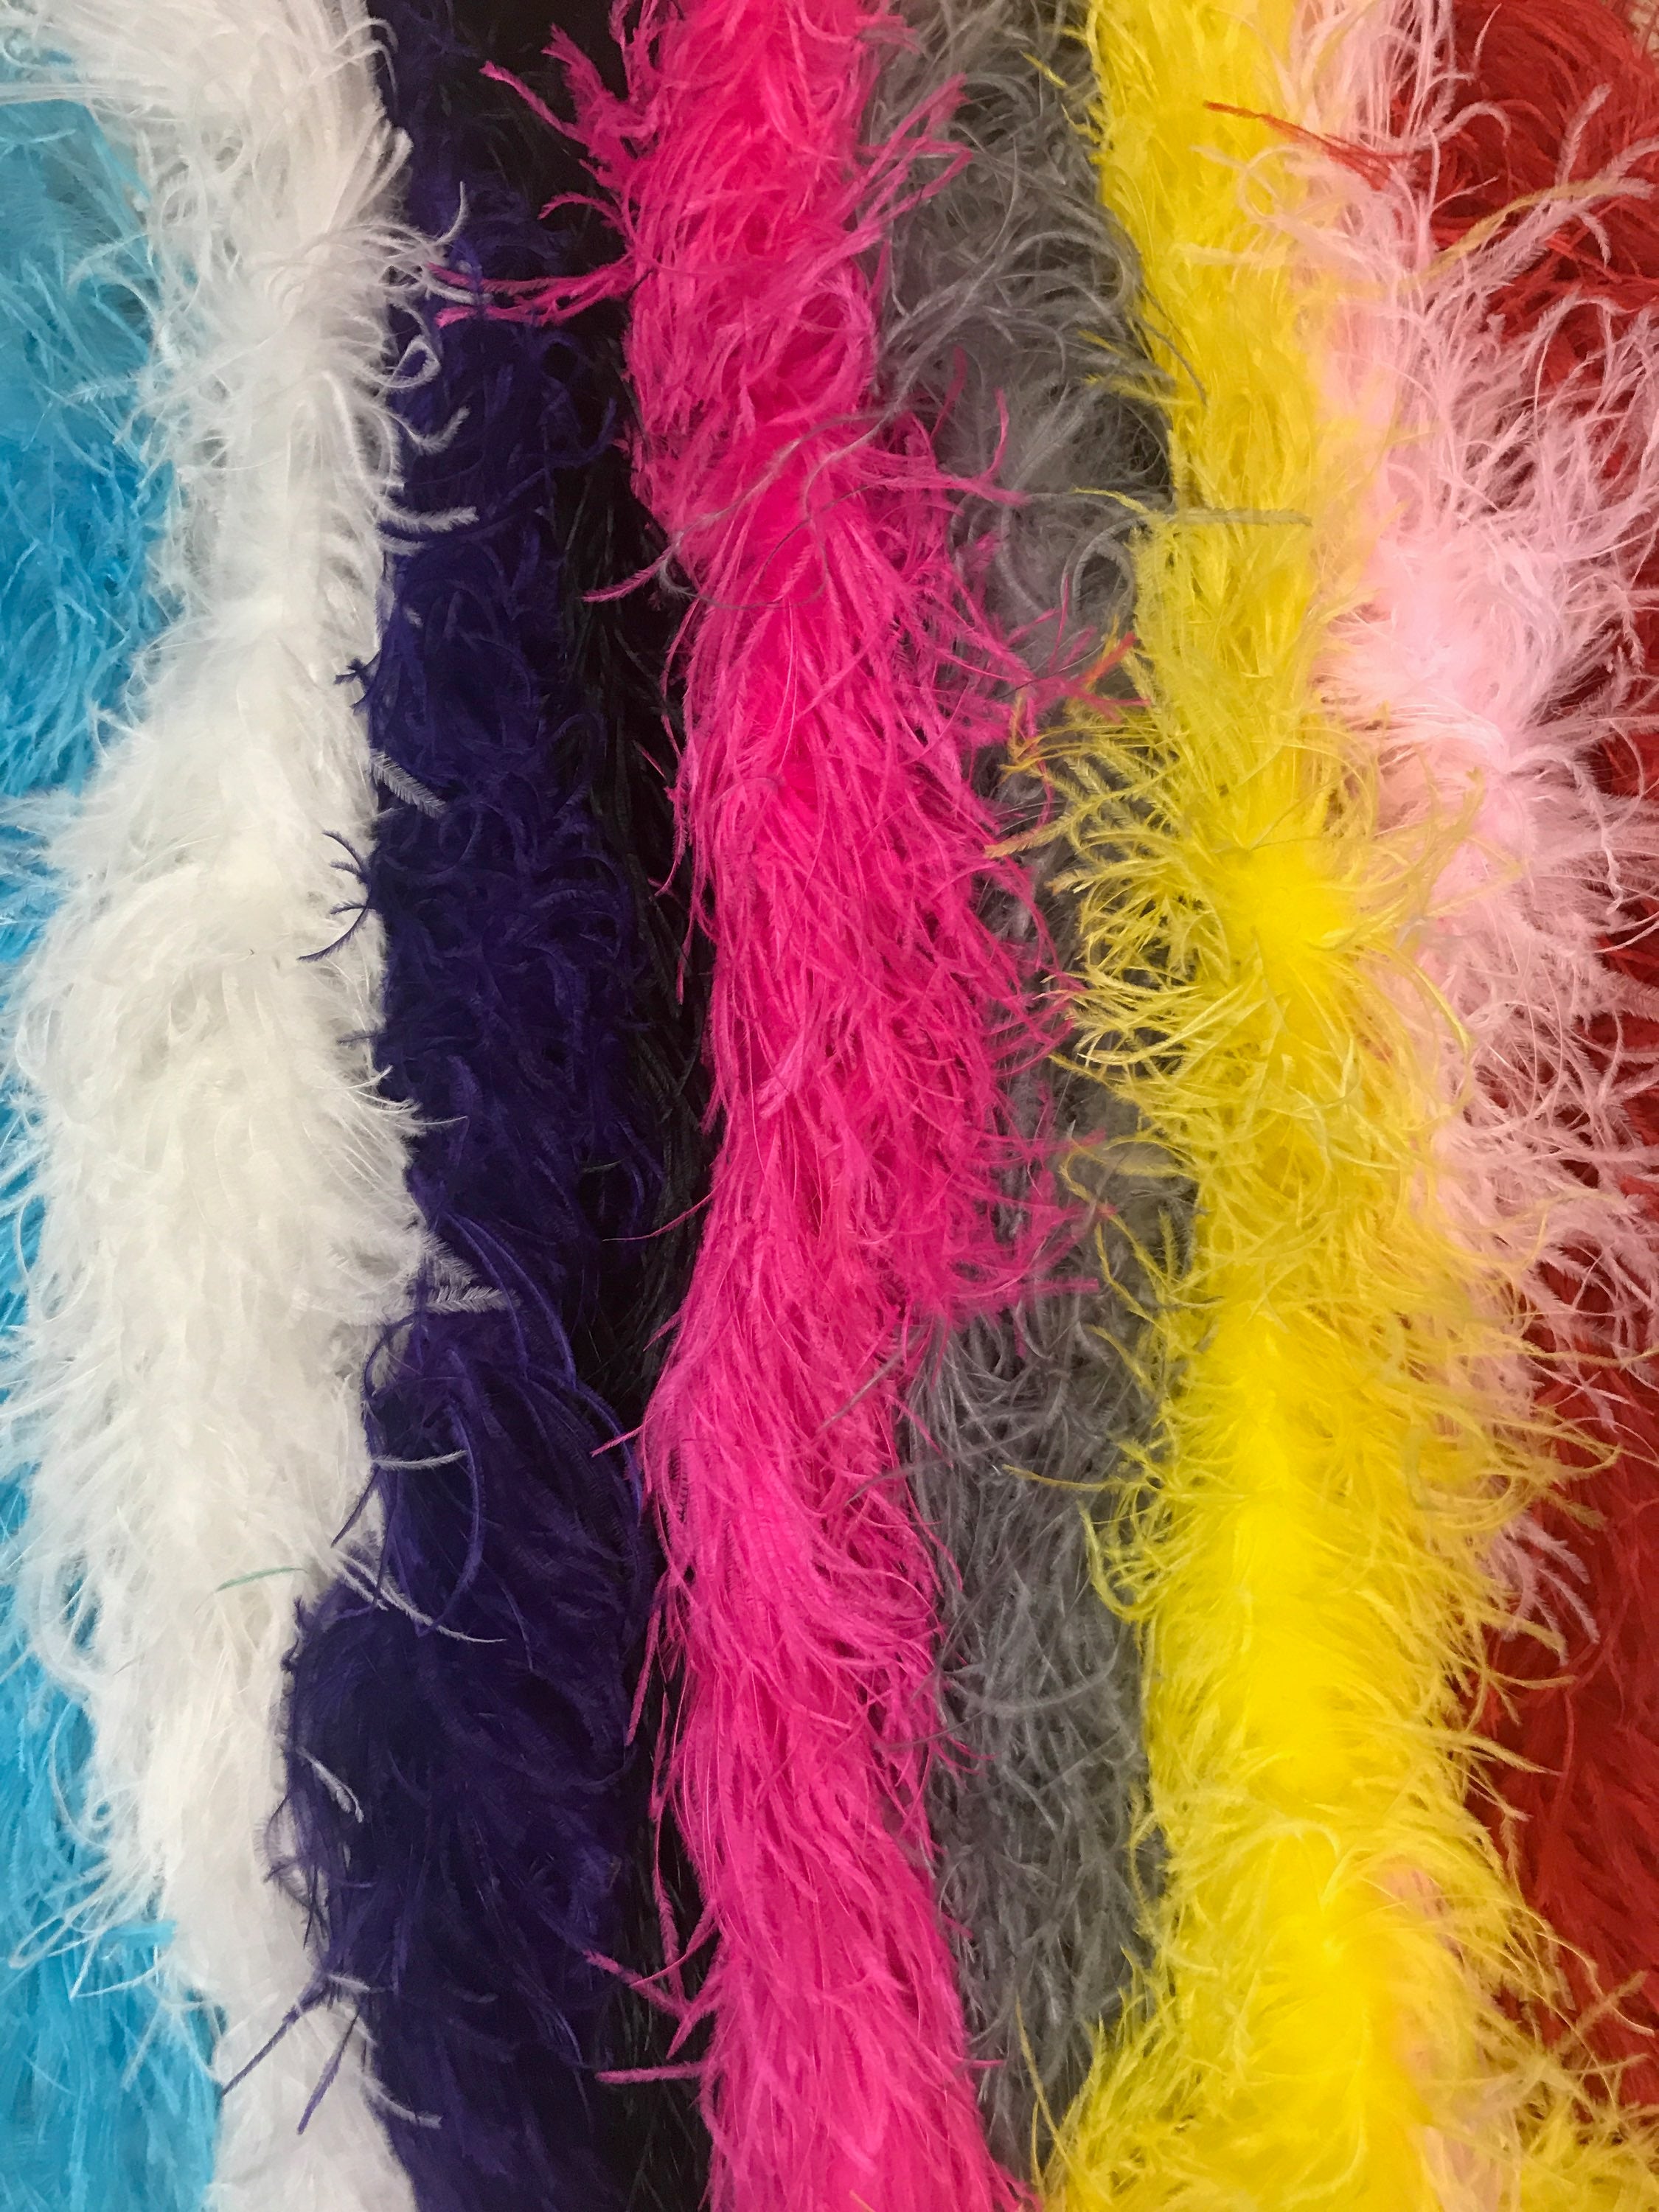 (Sold by Piece) Ostrich with Marabou Feather Boa for Sale Online 2 Ply